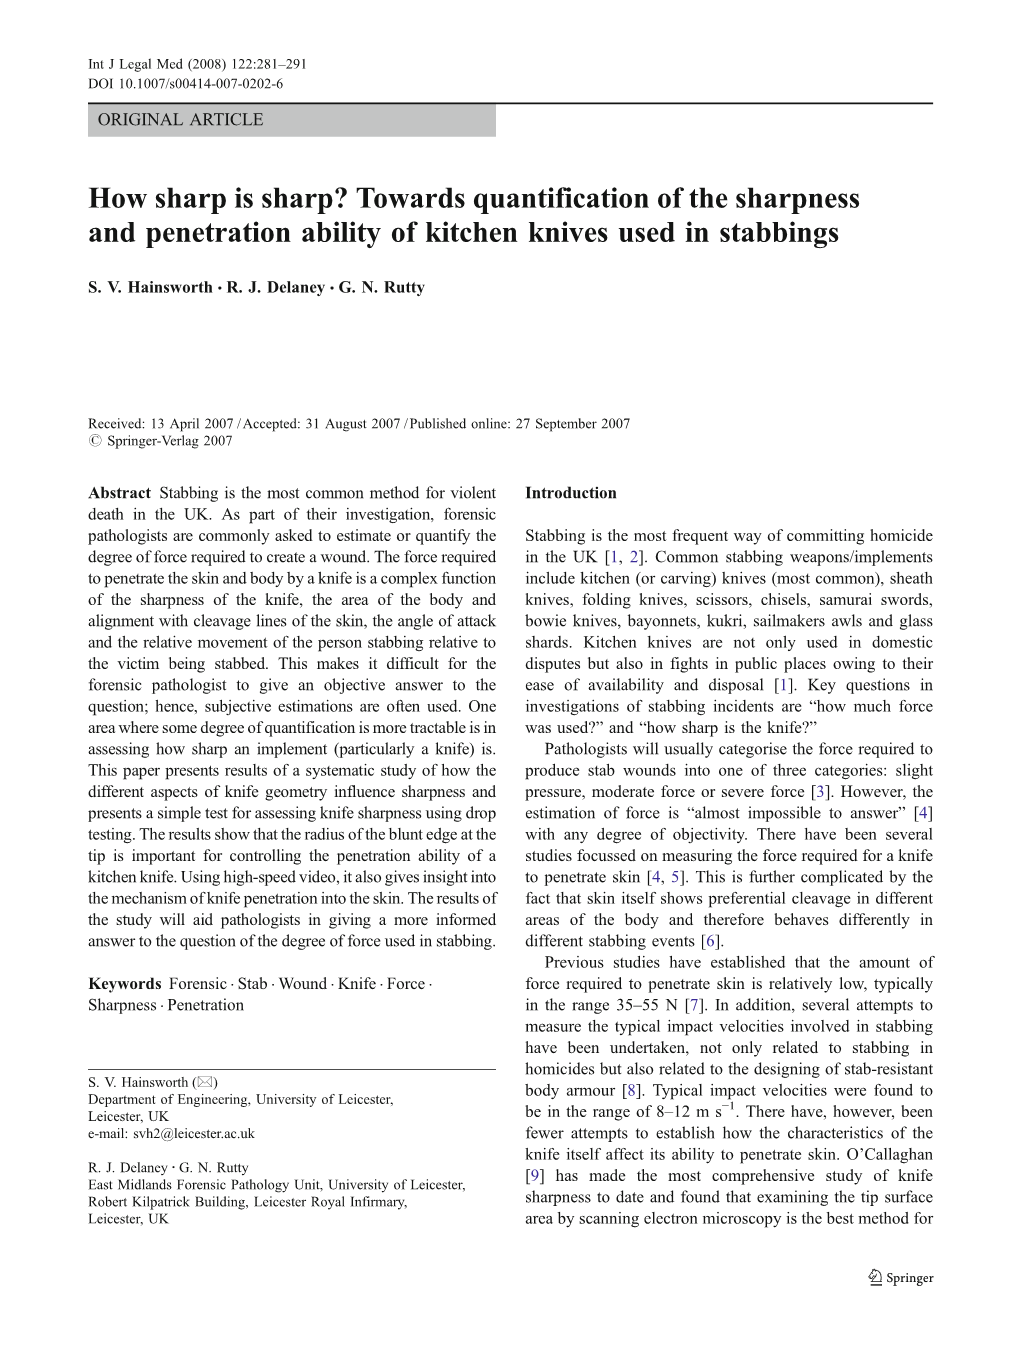 How Sharp Is Sharp? Towards Quantification of the Sharpness and Penetration Ability of Kitchen Knives Used in Stabbings